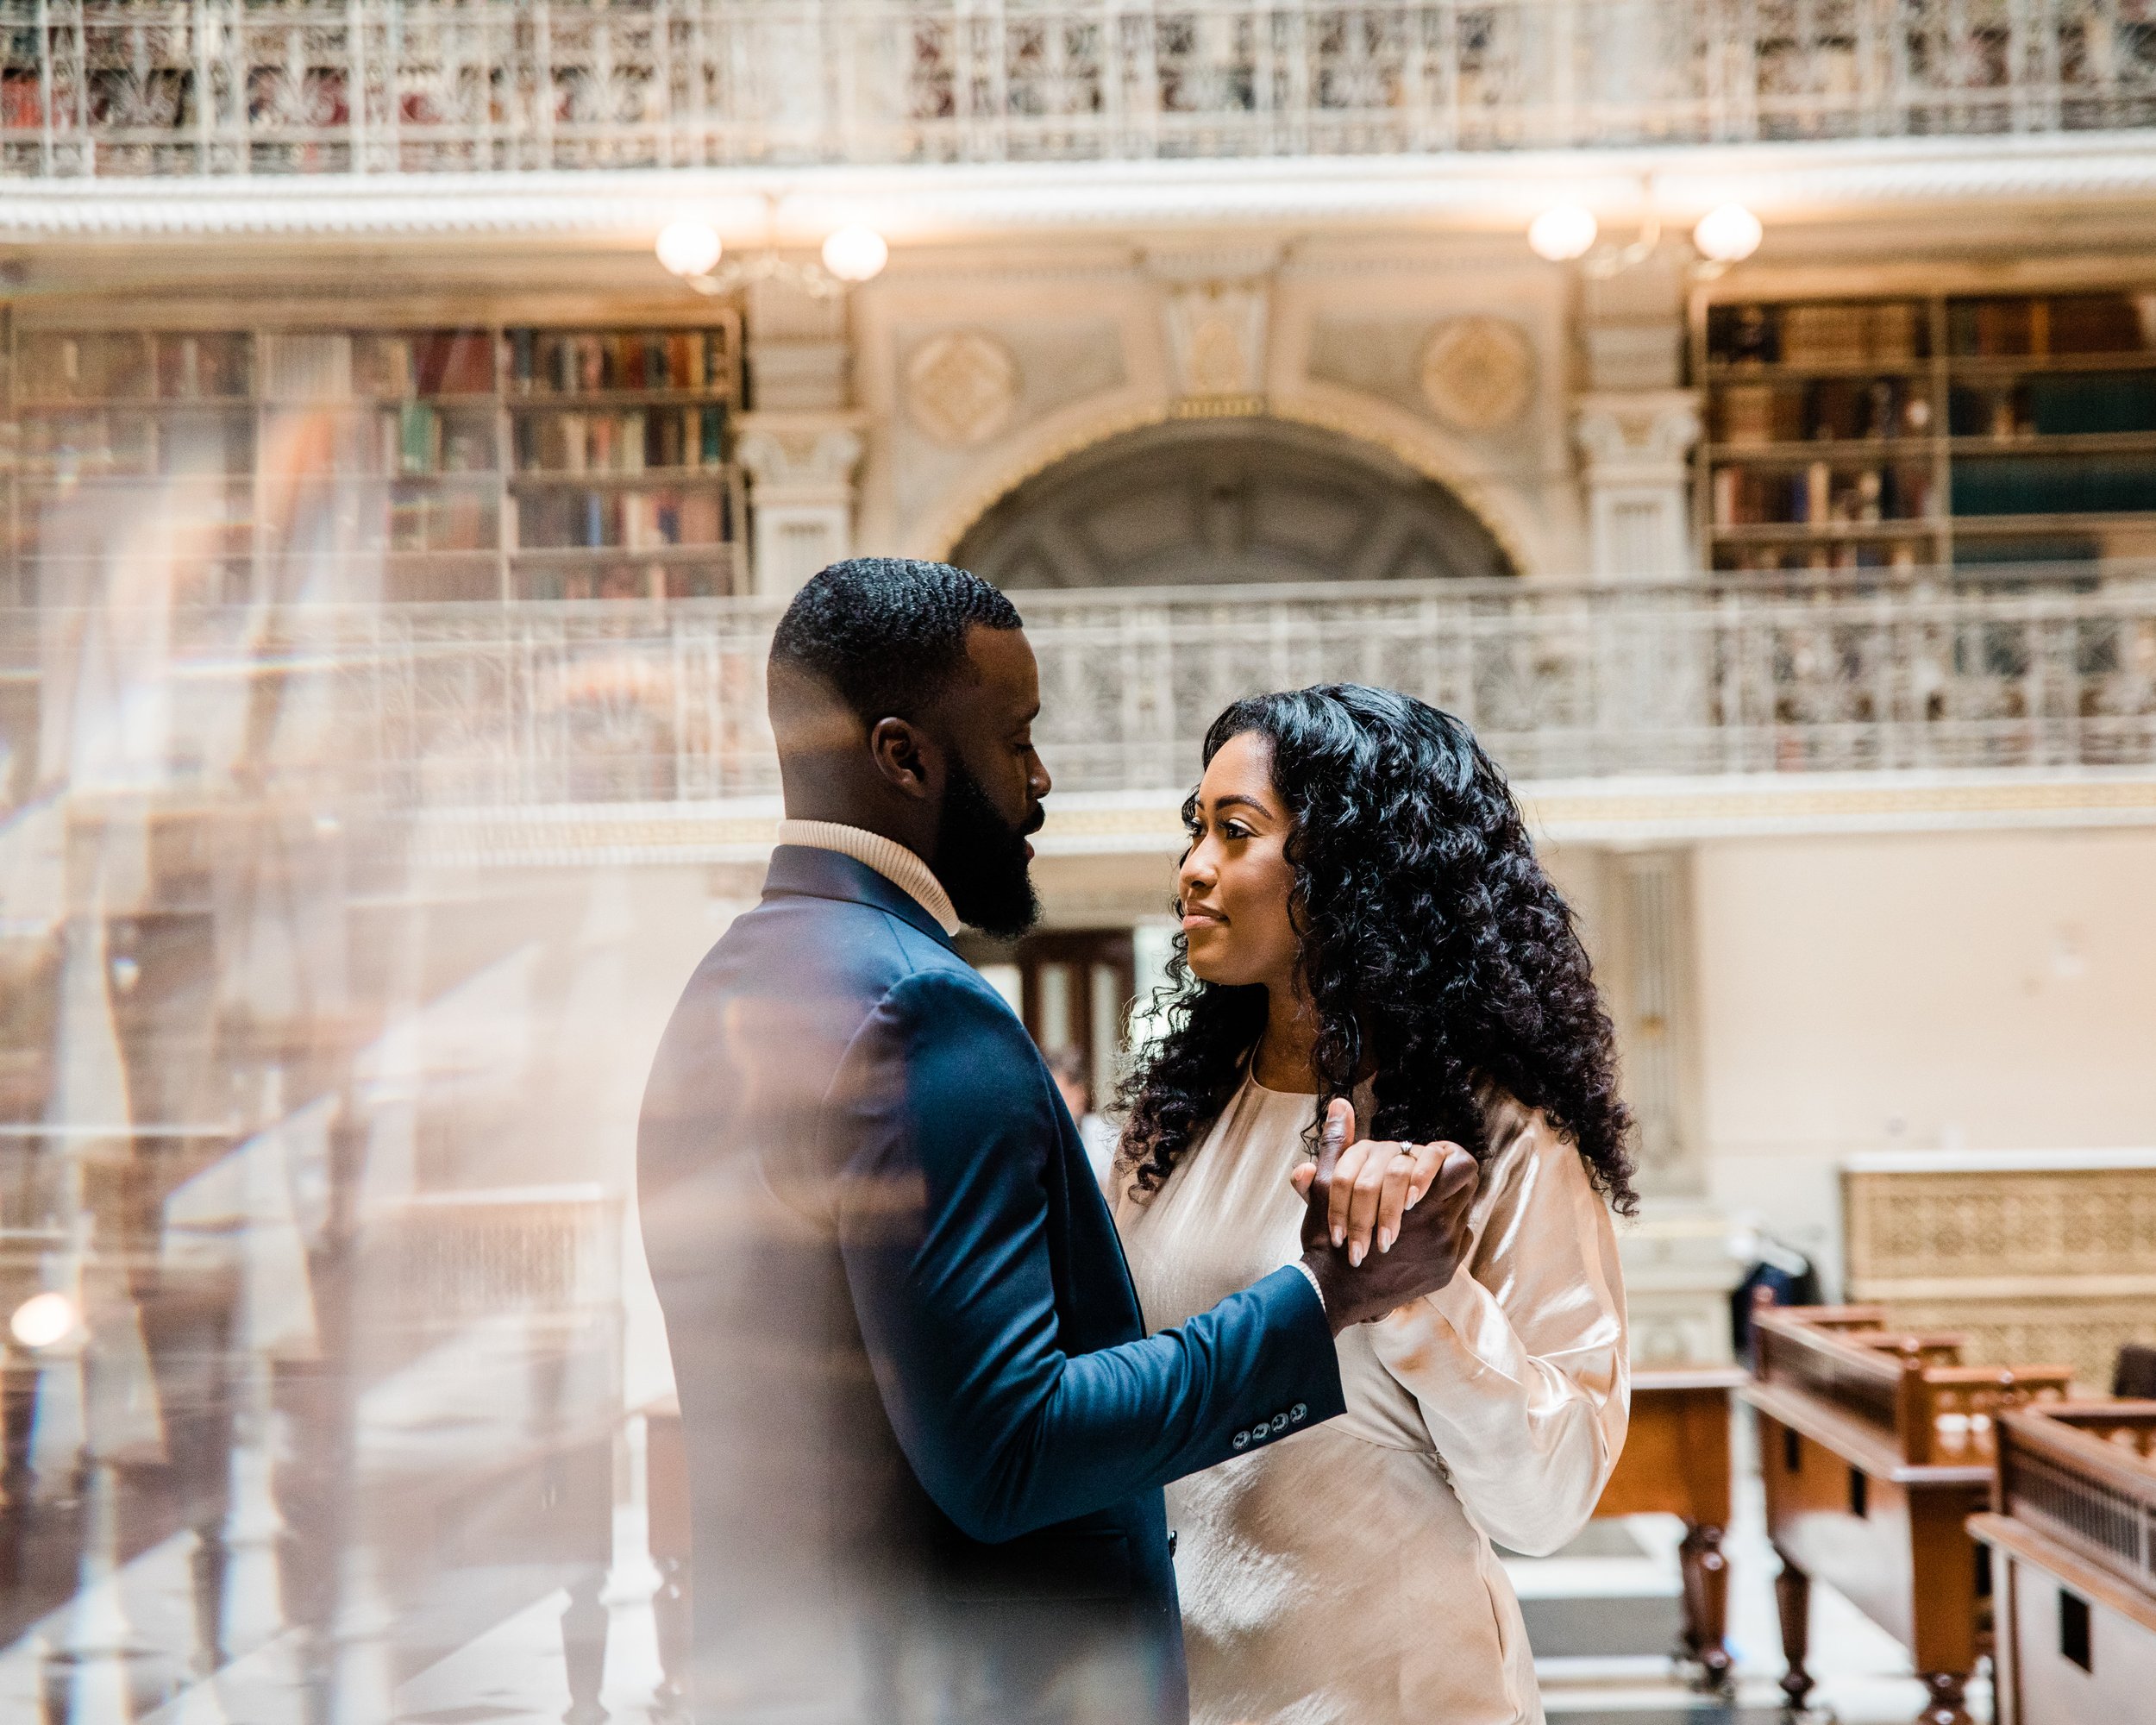 Disney Beauty and The Beast Inspired Engagement Session at The Peabody Library Baltimore Maryland shot by Megapixels Media Photography-9.jpg